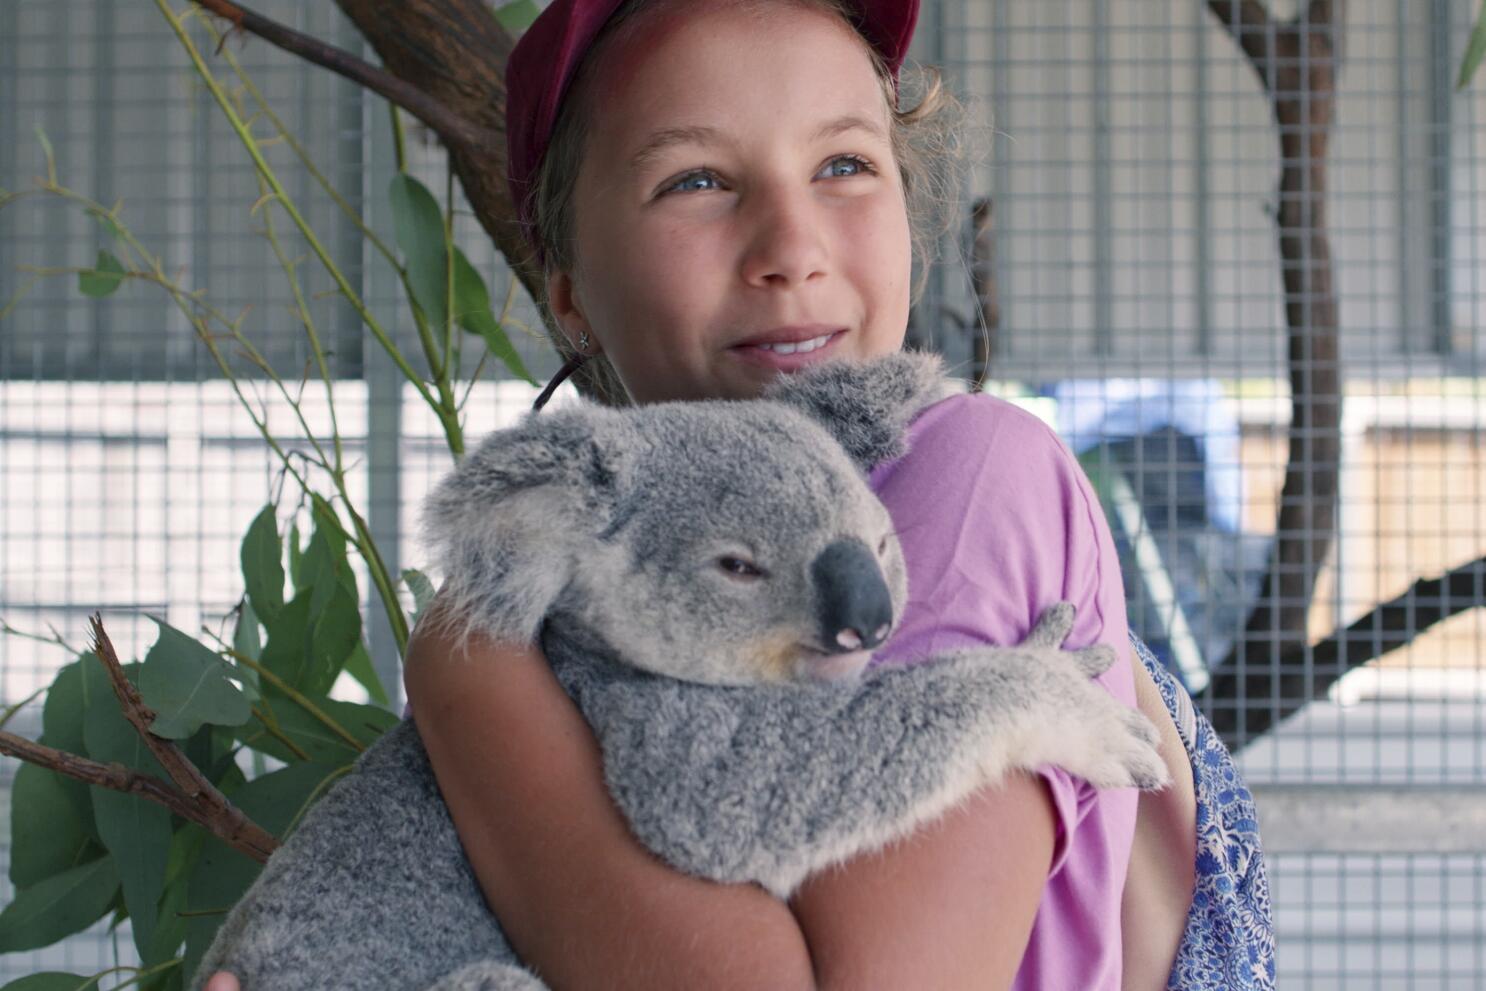 New Netflix series features an 11-year-old 'koala whisperer' - The